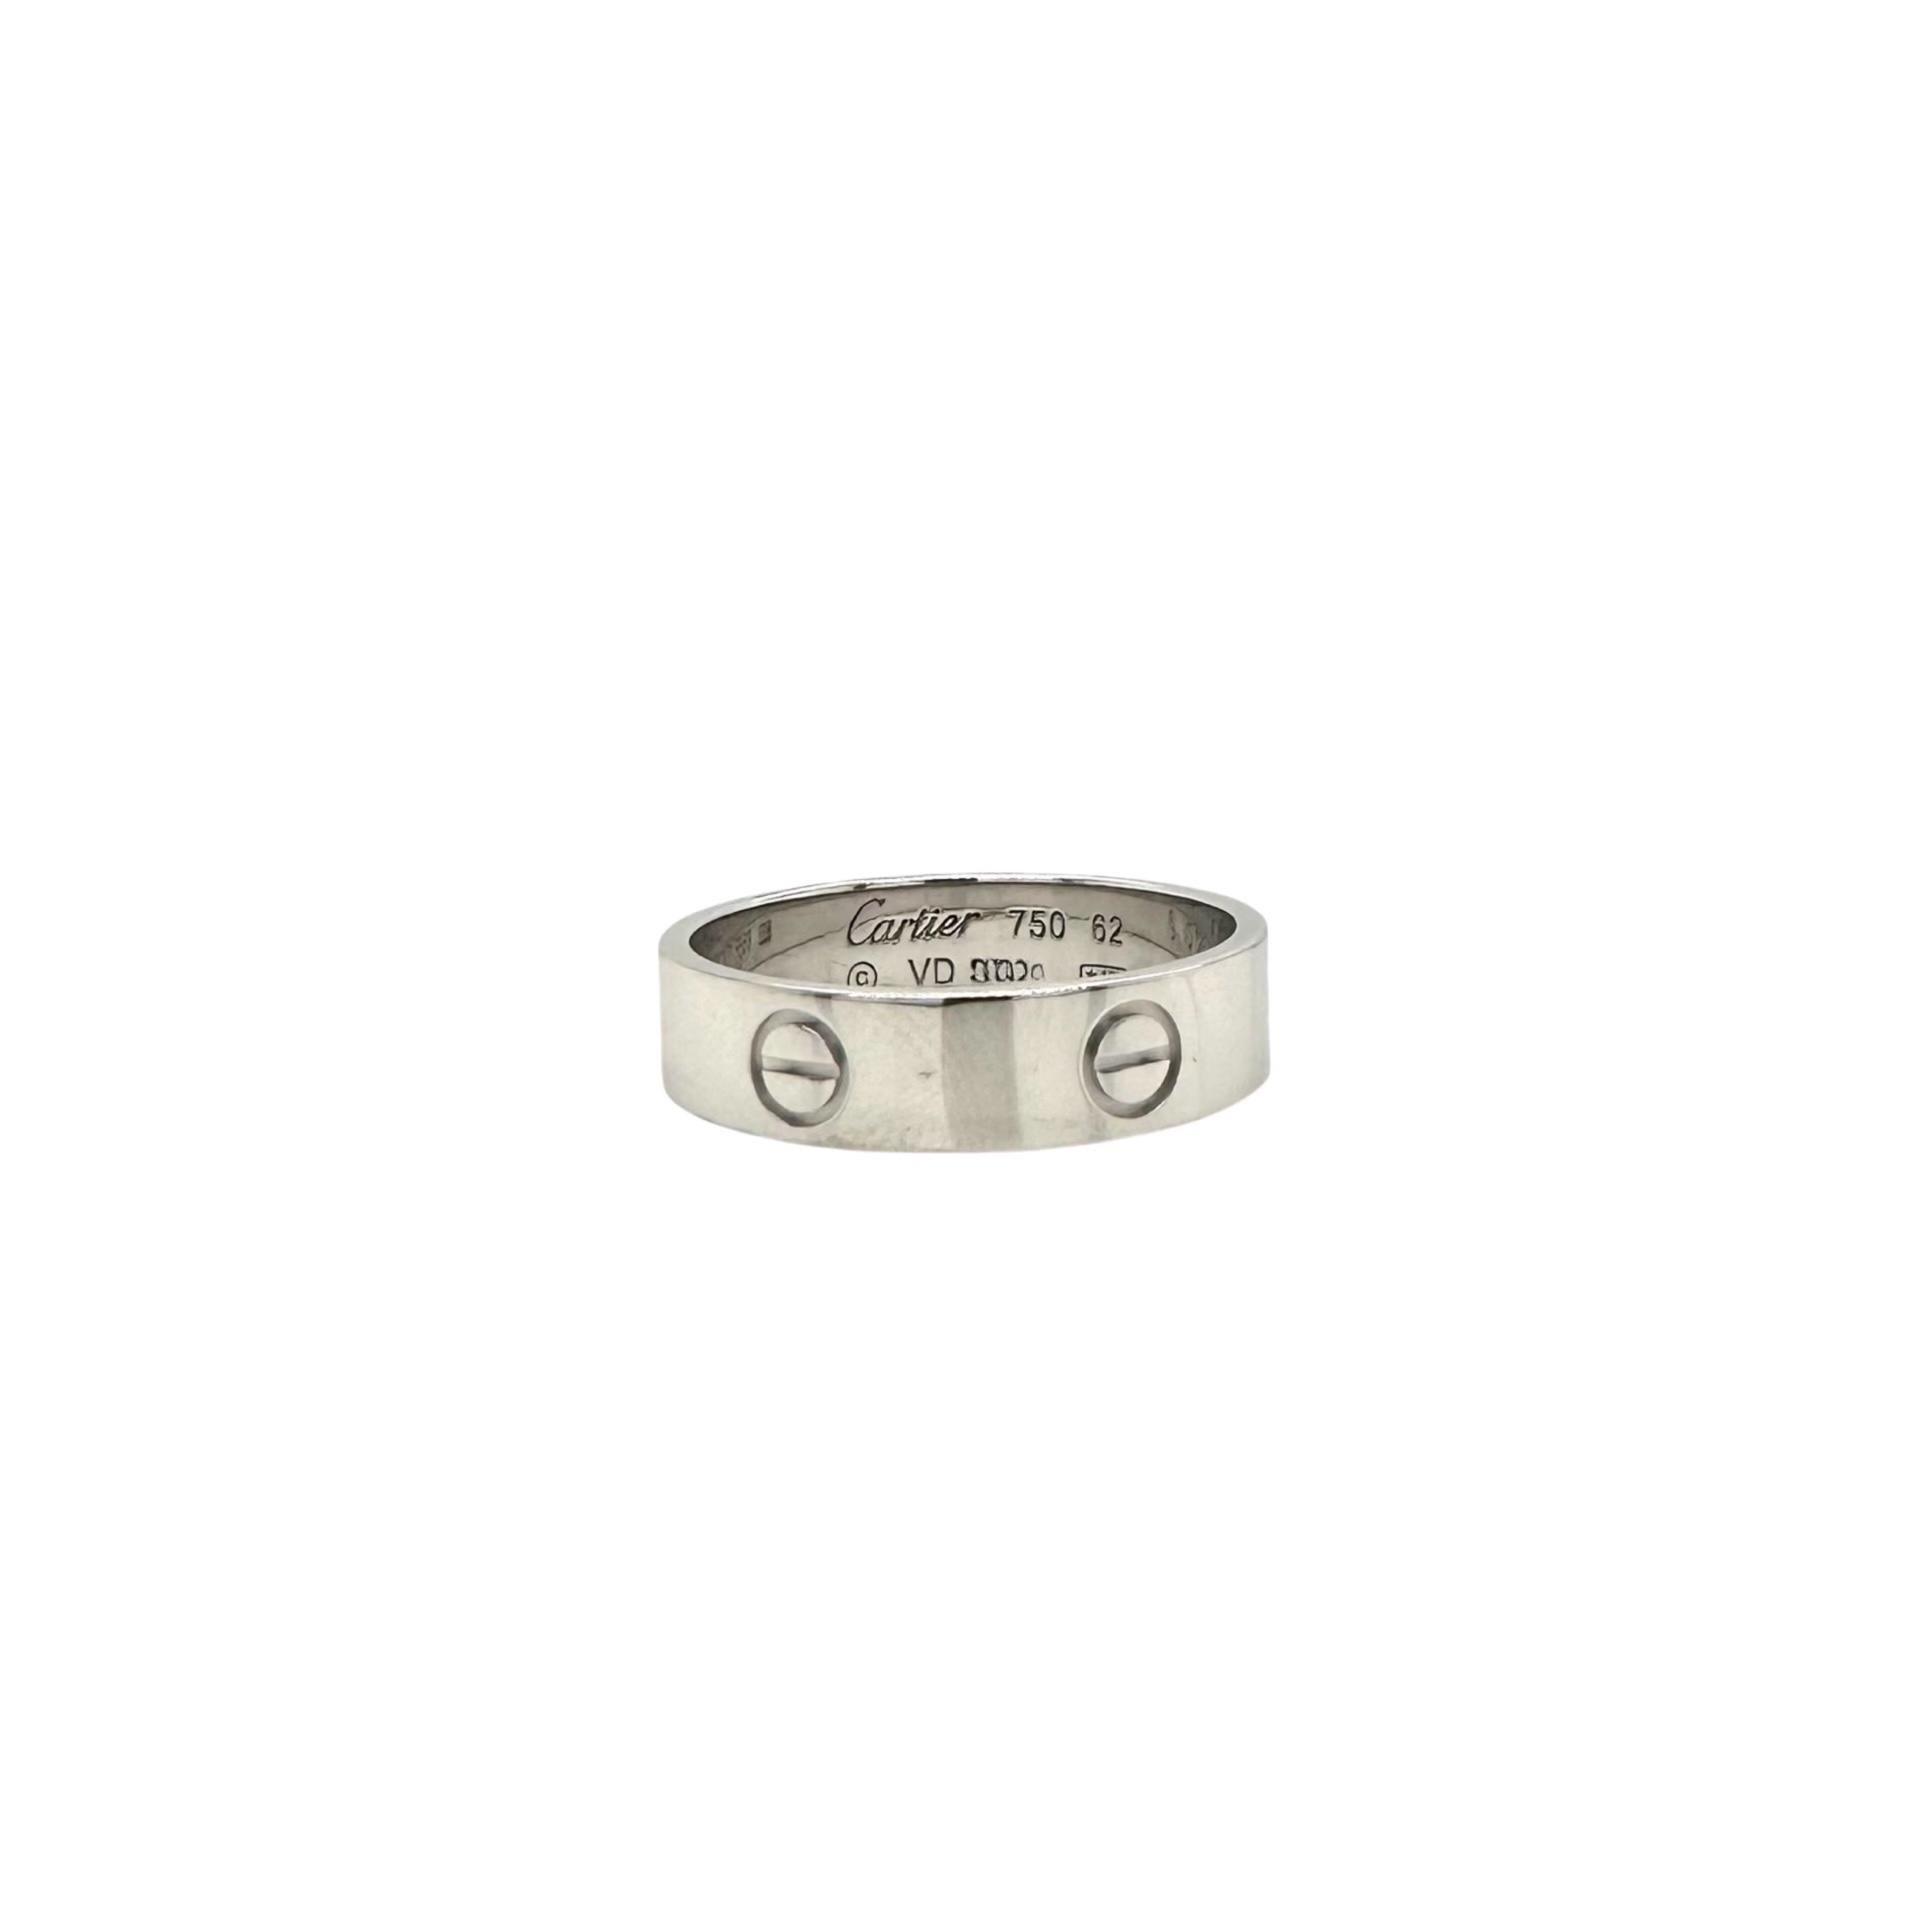 Designer: Cartier
Collection: Love 
Style: Ring
Metal: White Gold
Metal Purity : 18K
Size: 10 (US) ; 62 (euro)
Box/Papers: Yes/Yes
​​​​​​​Includes:  24 Months Brilliance Jewels Warranty
                Cartier Box
              Cartier Certificate